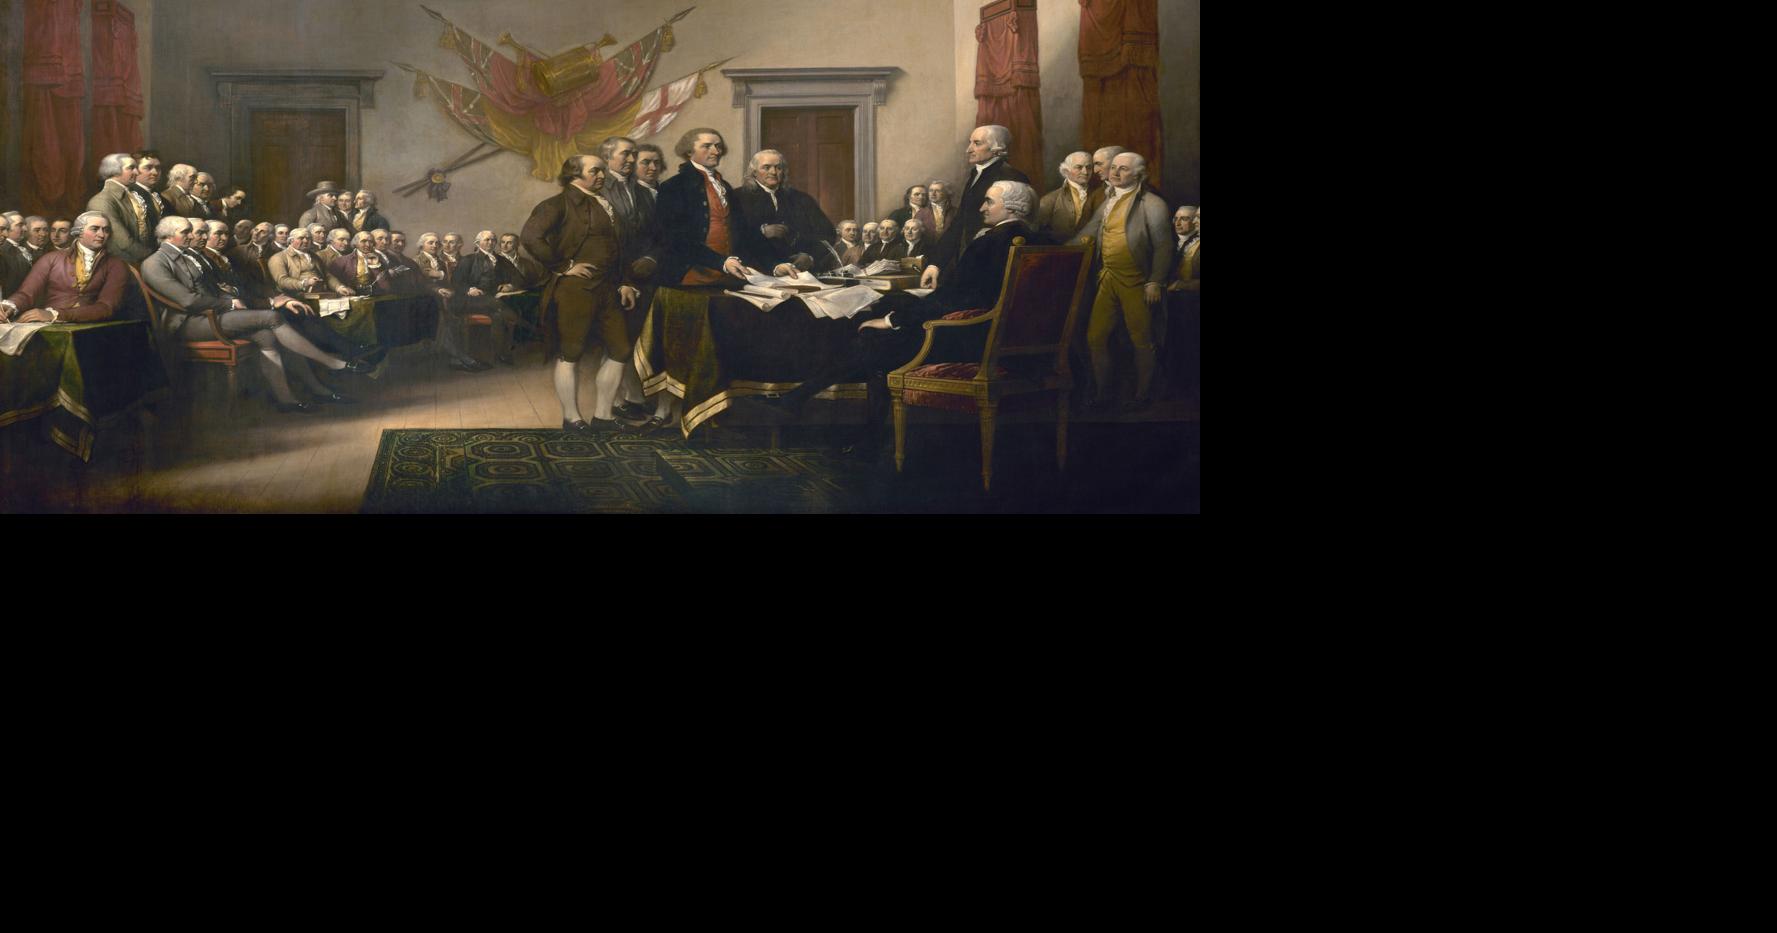 Letter: Founding Fathers knew freedom hinged on integrity